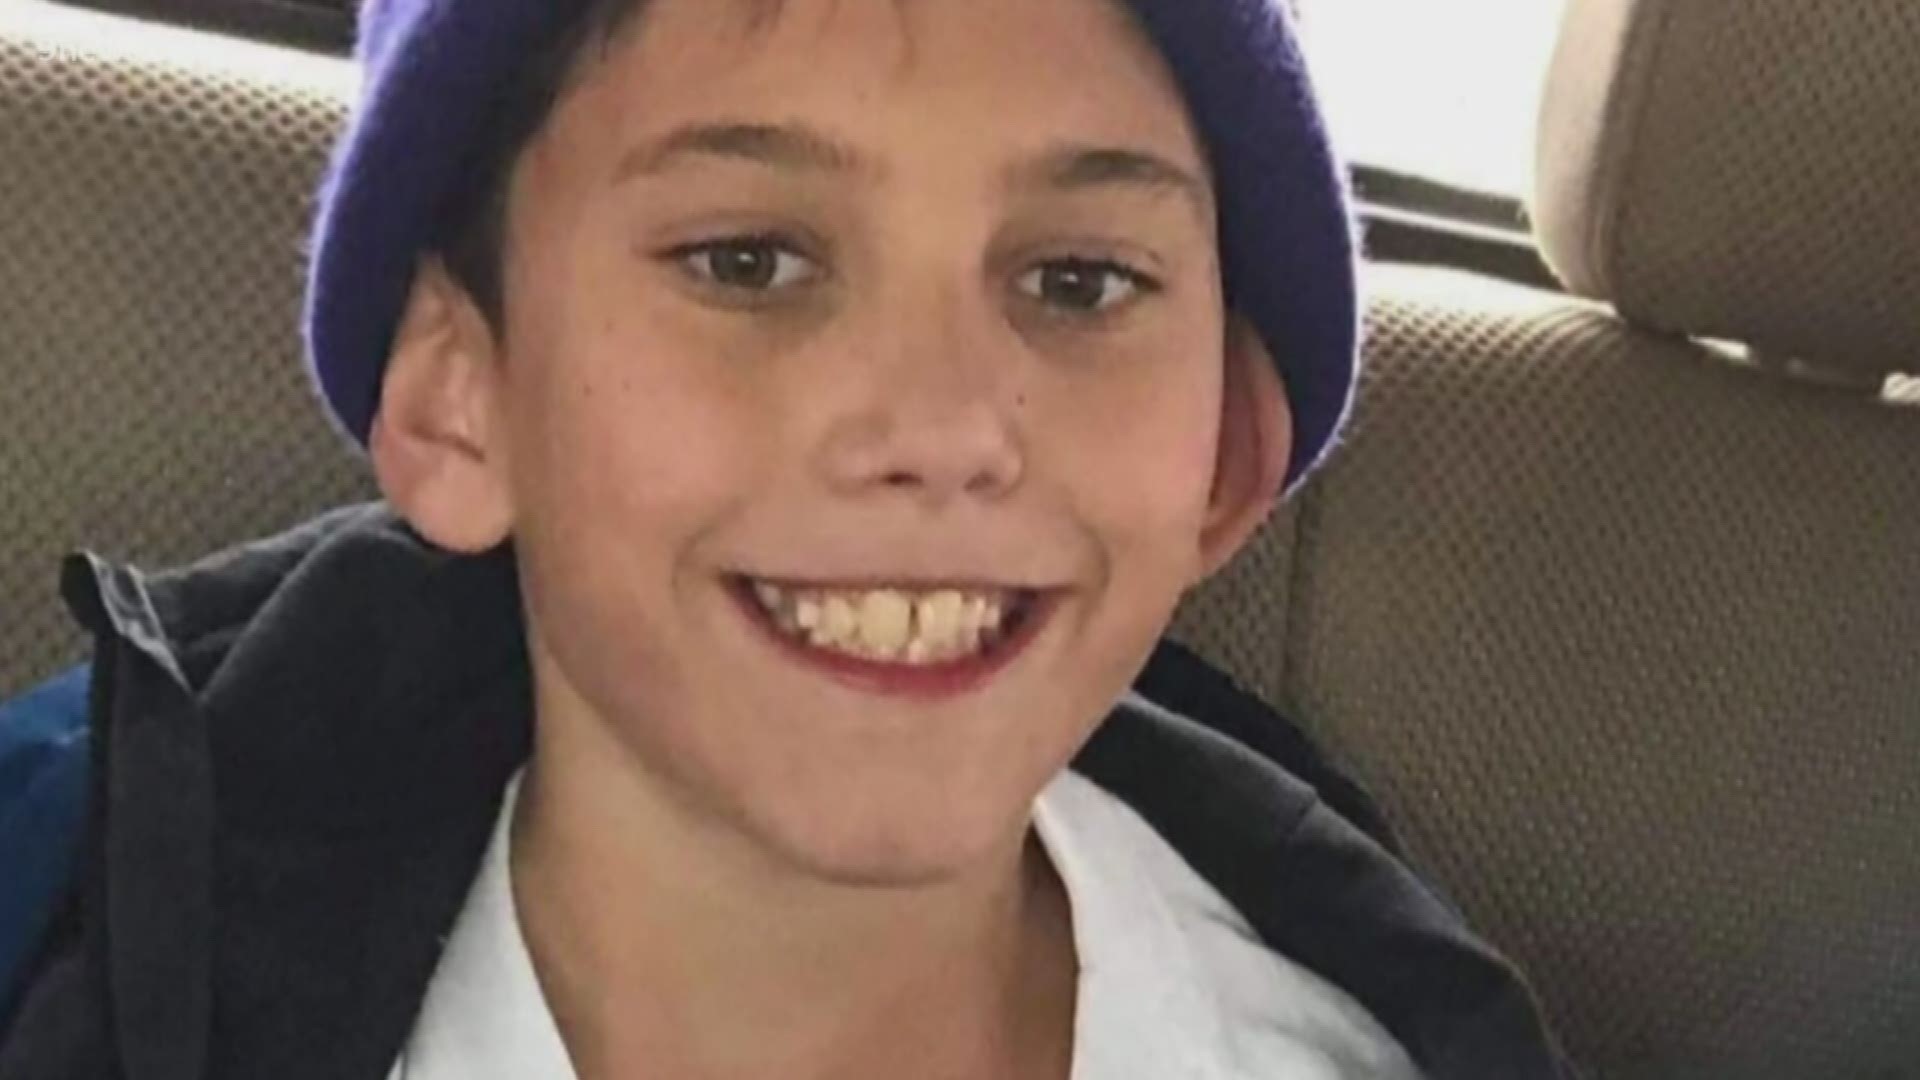 A Florida medical examiner has tentatively identified the remains of a young boy found near Pensacola Wednesday as 11-year-old Gannon Stauch.